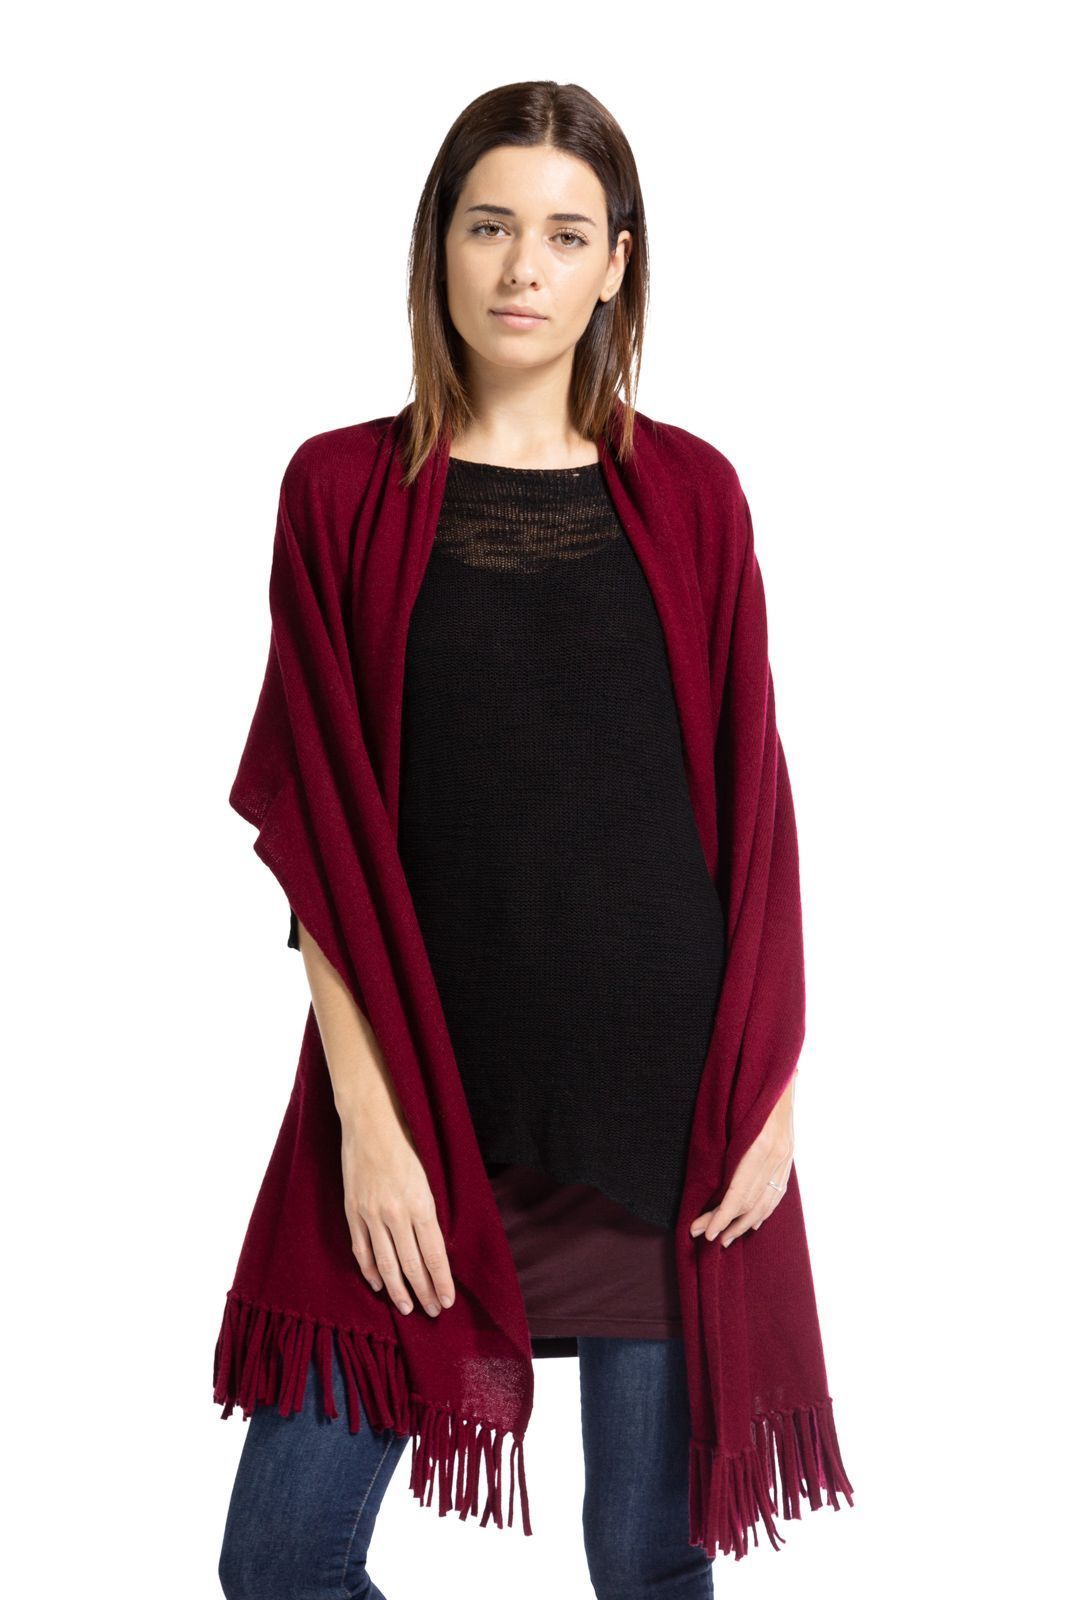 Women's 100% Pure Cashmere Knit Shawl Wrap with Fringe and Gift Box Womens>Accessories>Scarf Fishers Finery Cabernet 